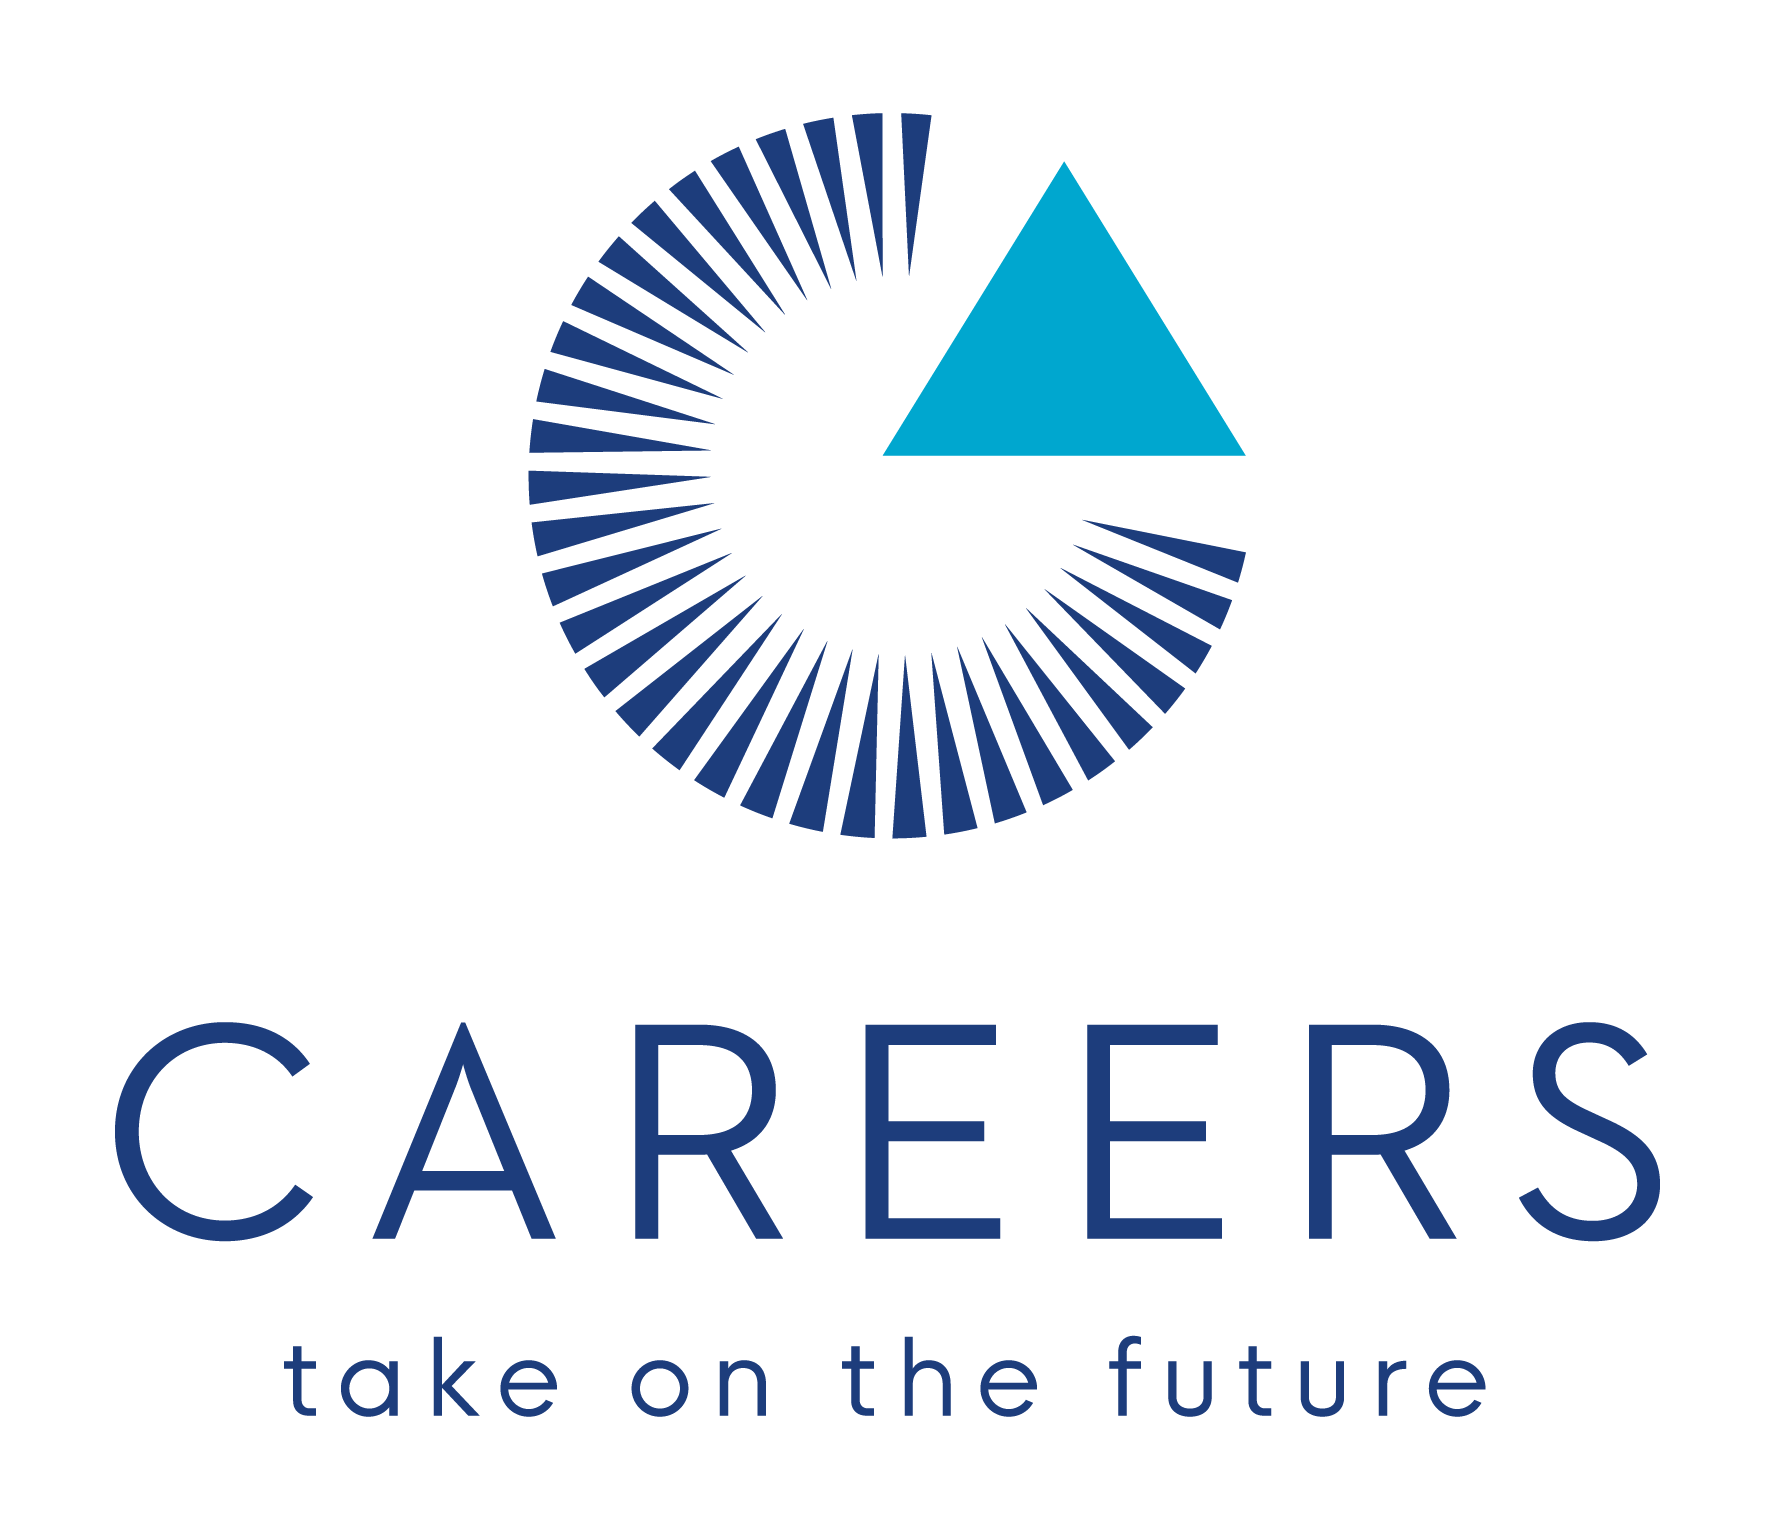 CAREERS: The Next Generation